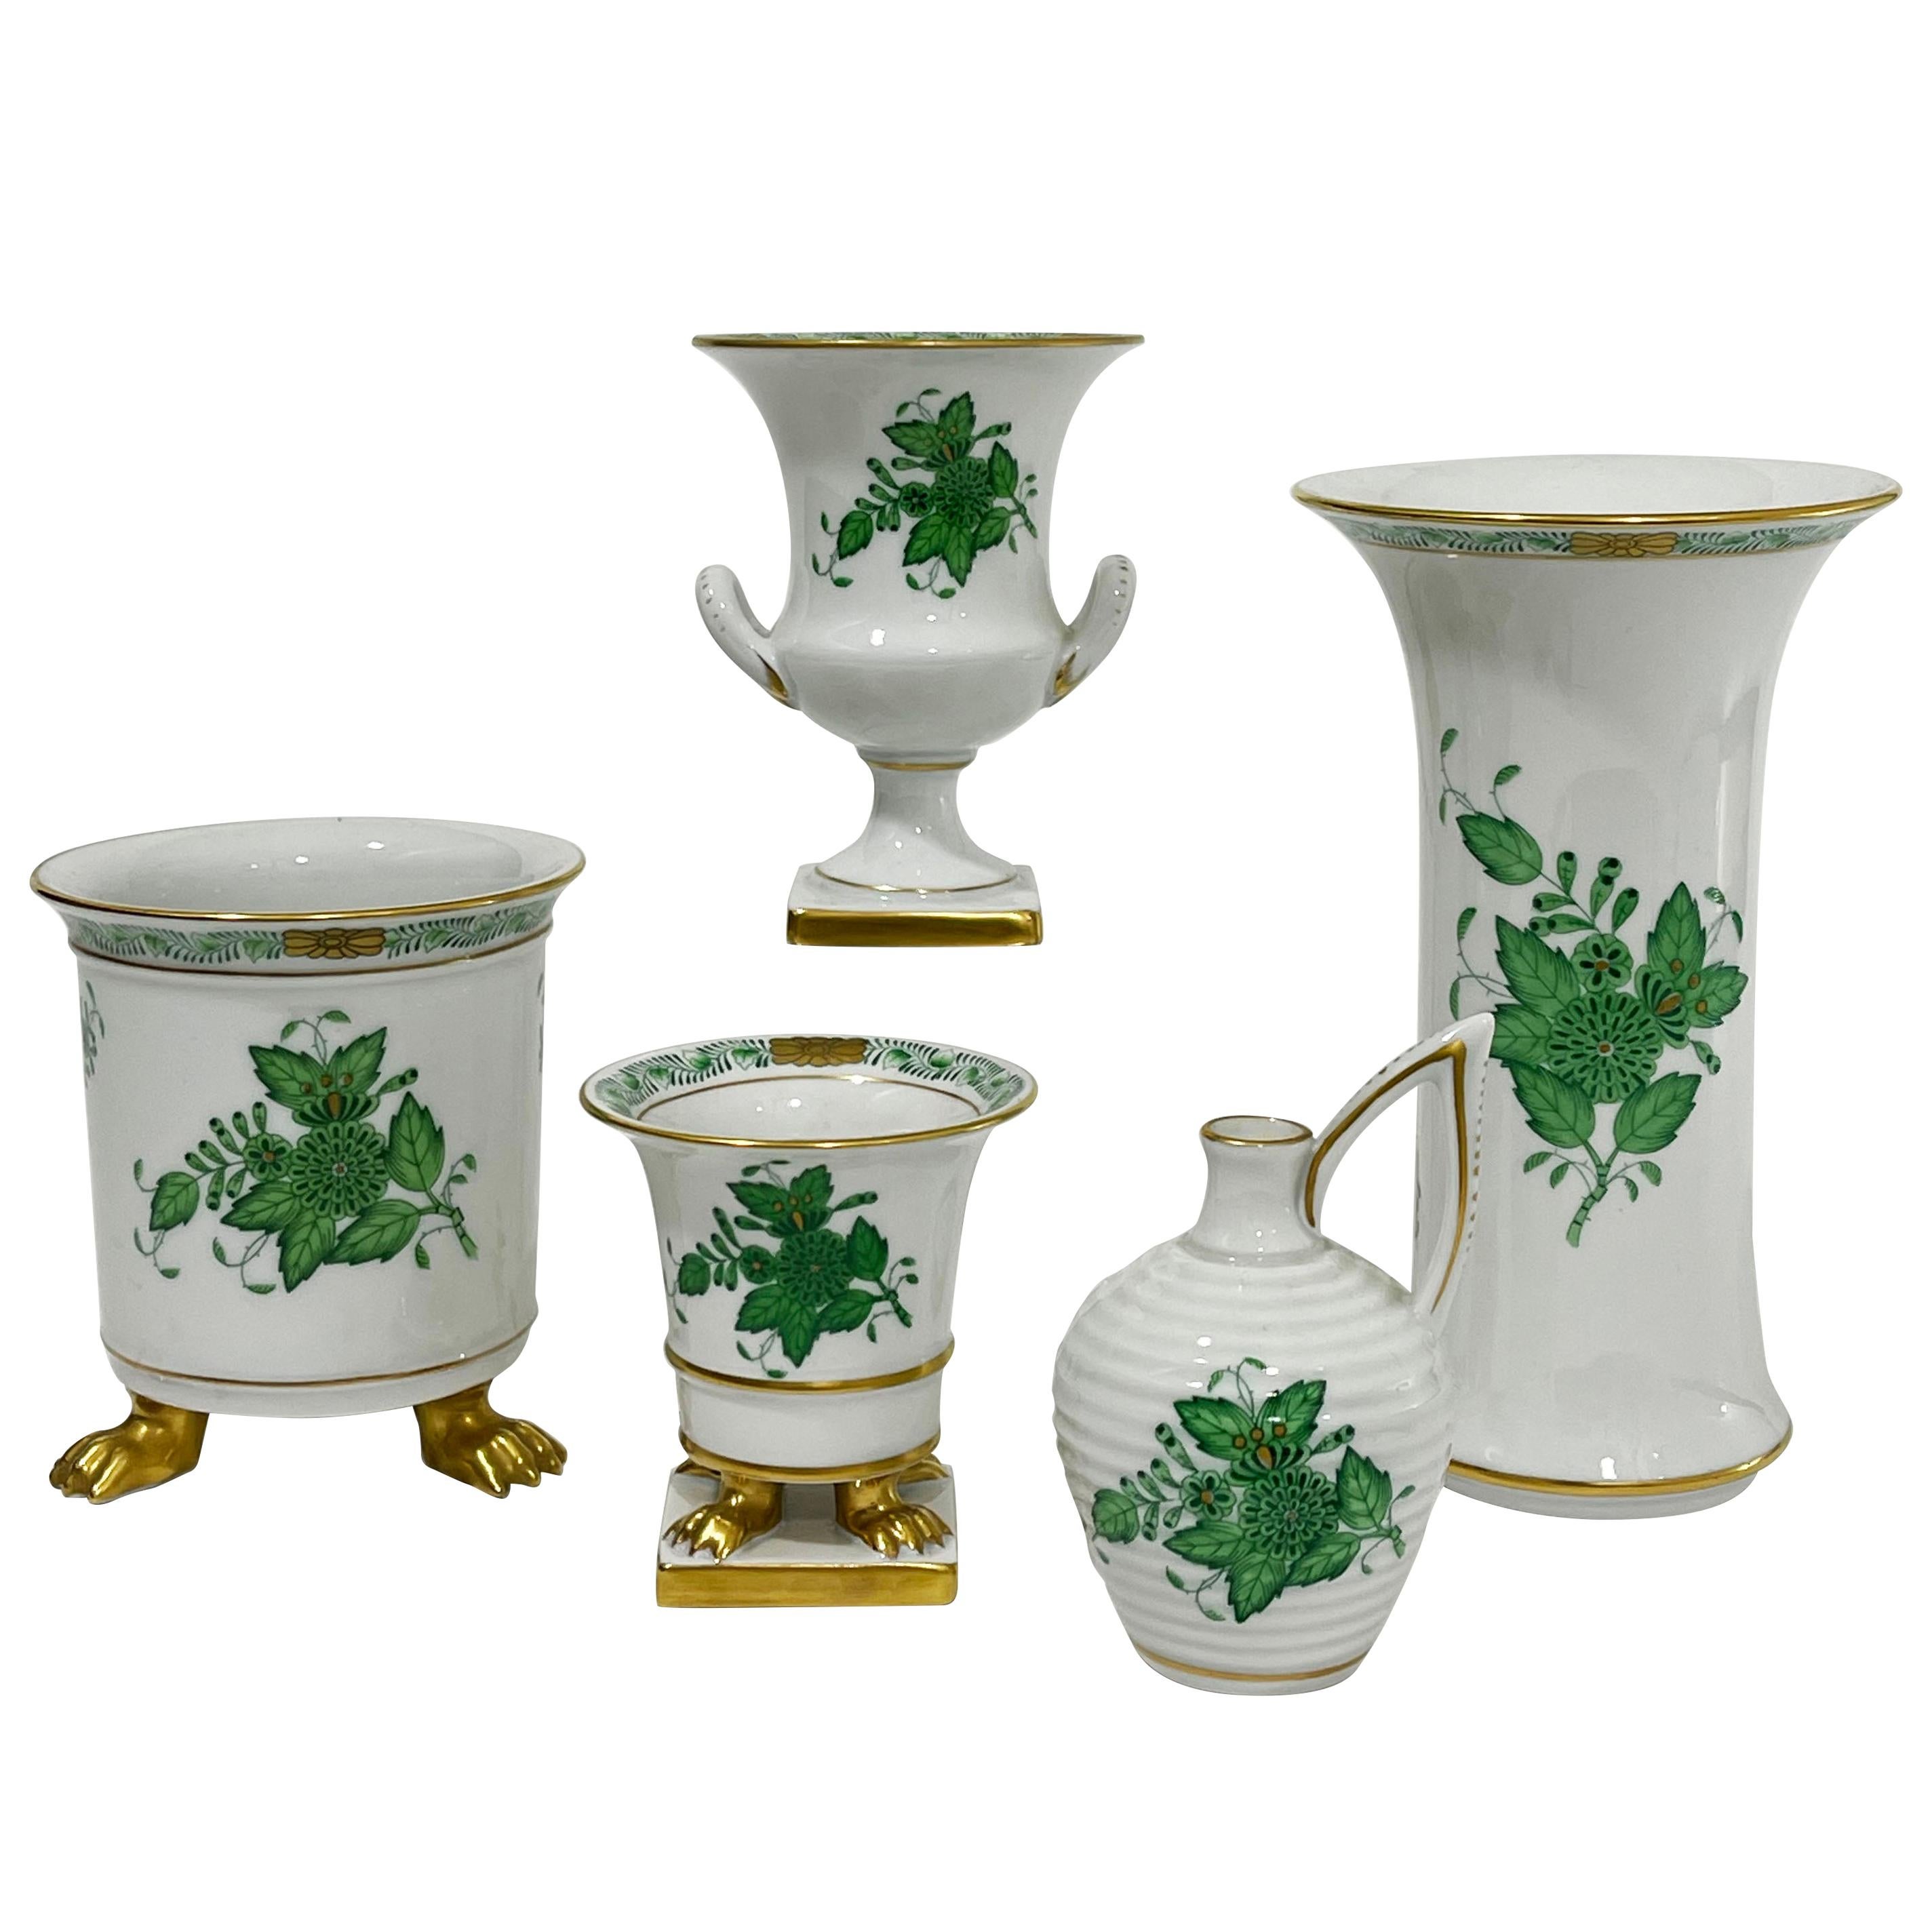 Herend Hungary Porcelain "Chinese Bouquet Apponyi Green" Set of 5 Small Vases